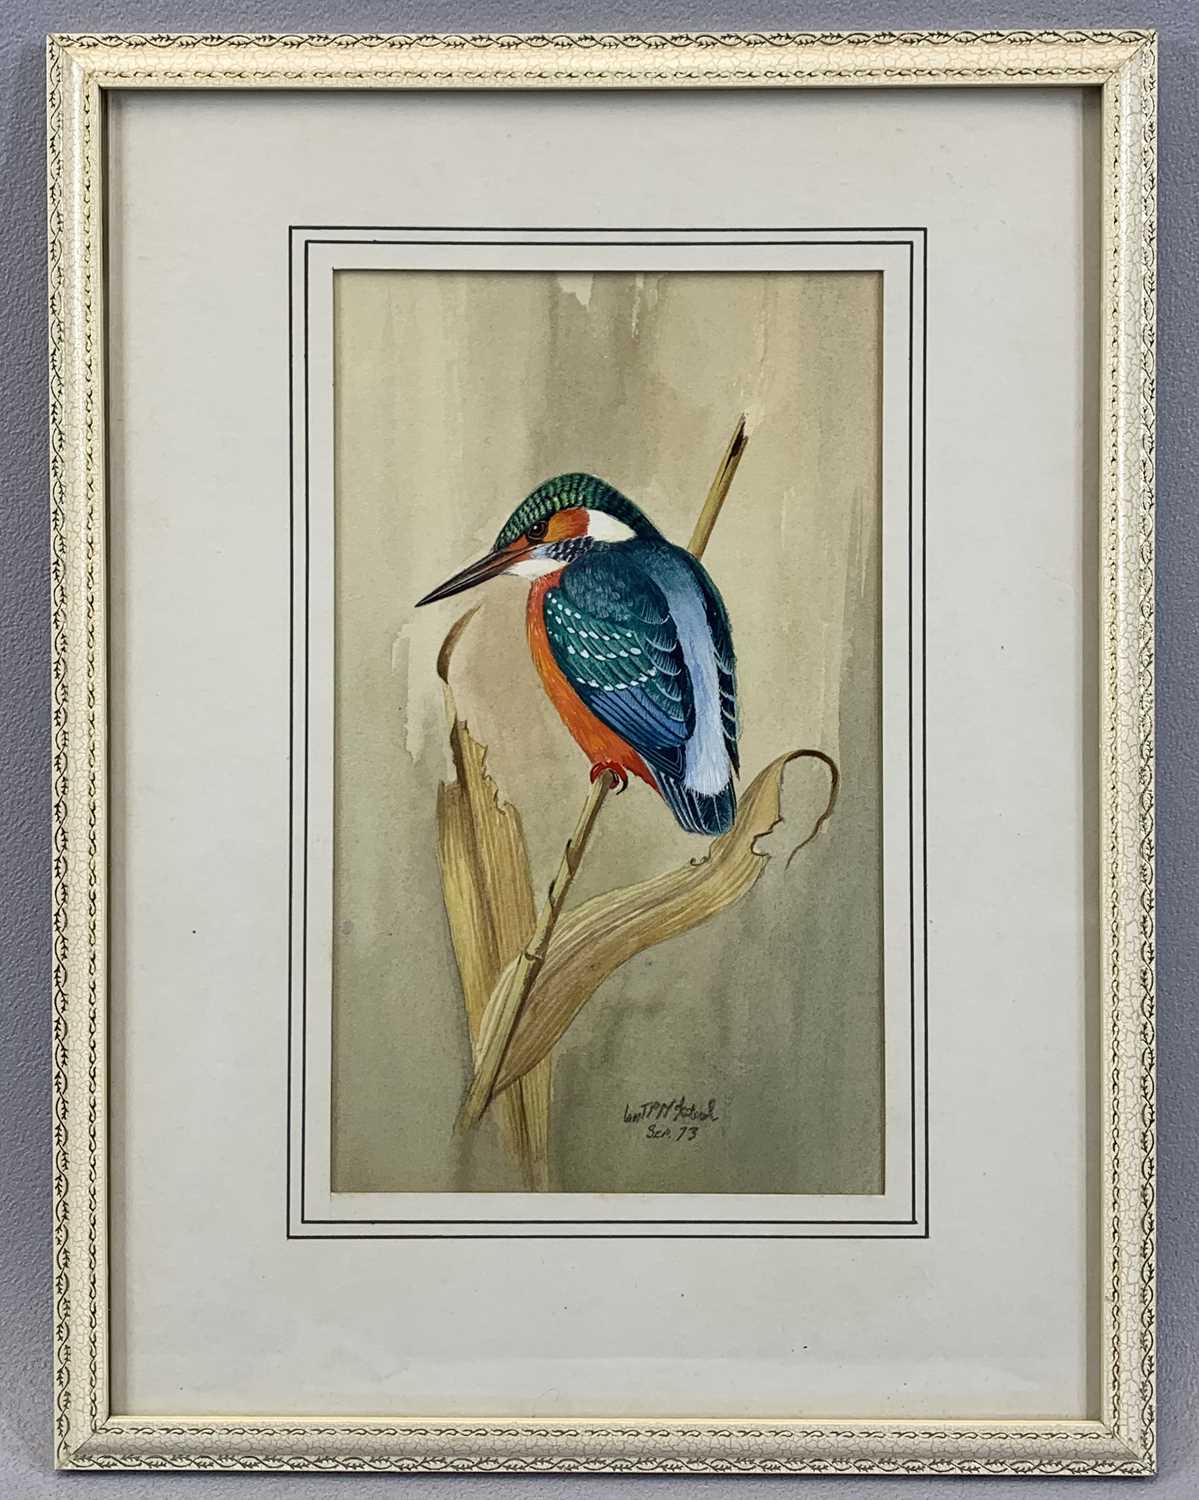 20TH CENTURY BRITISH SCHOOL finely detailed watercolour - a perched kingfisher, indistinctly - Image 2 of 2